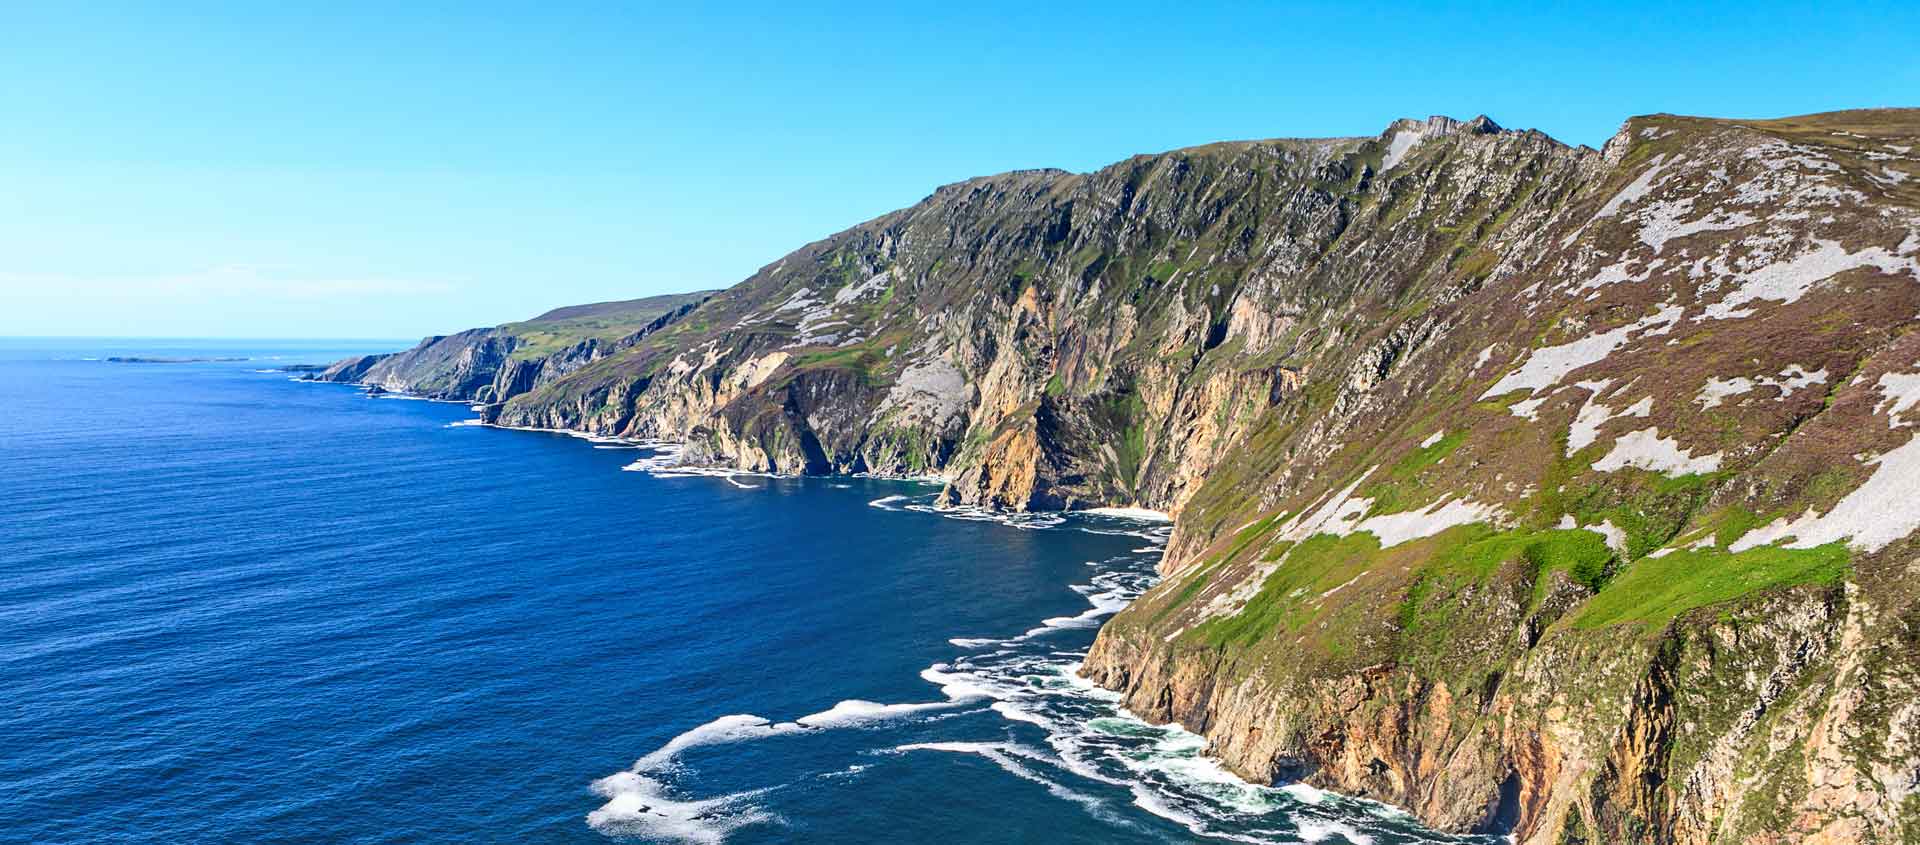 British Isles cruise image showing Sliver League Cliffs of Killybegs in Ireland